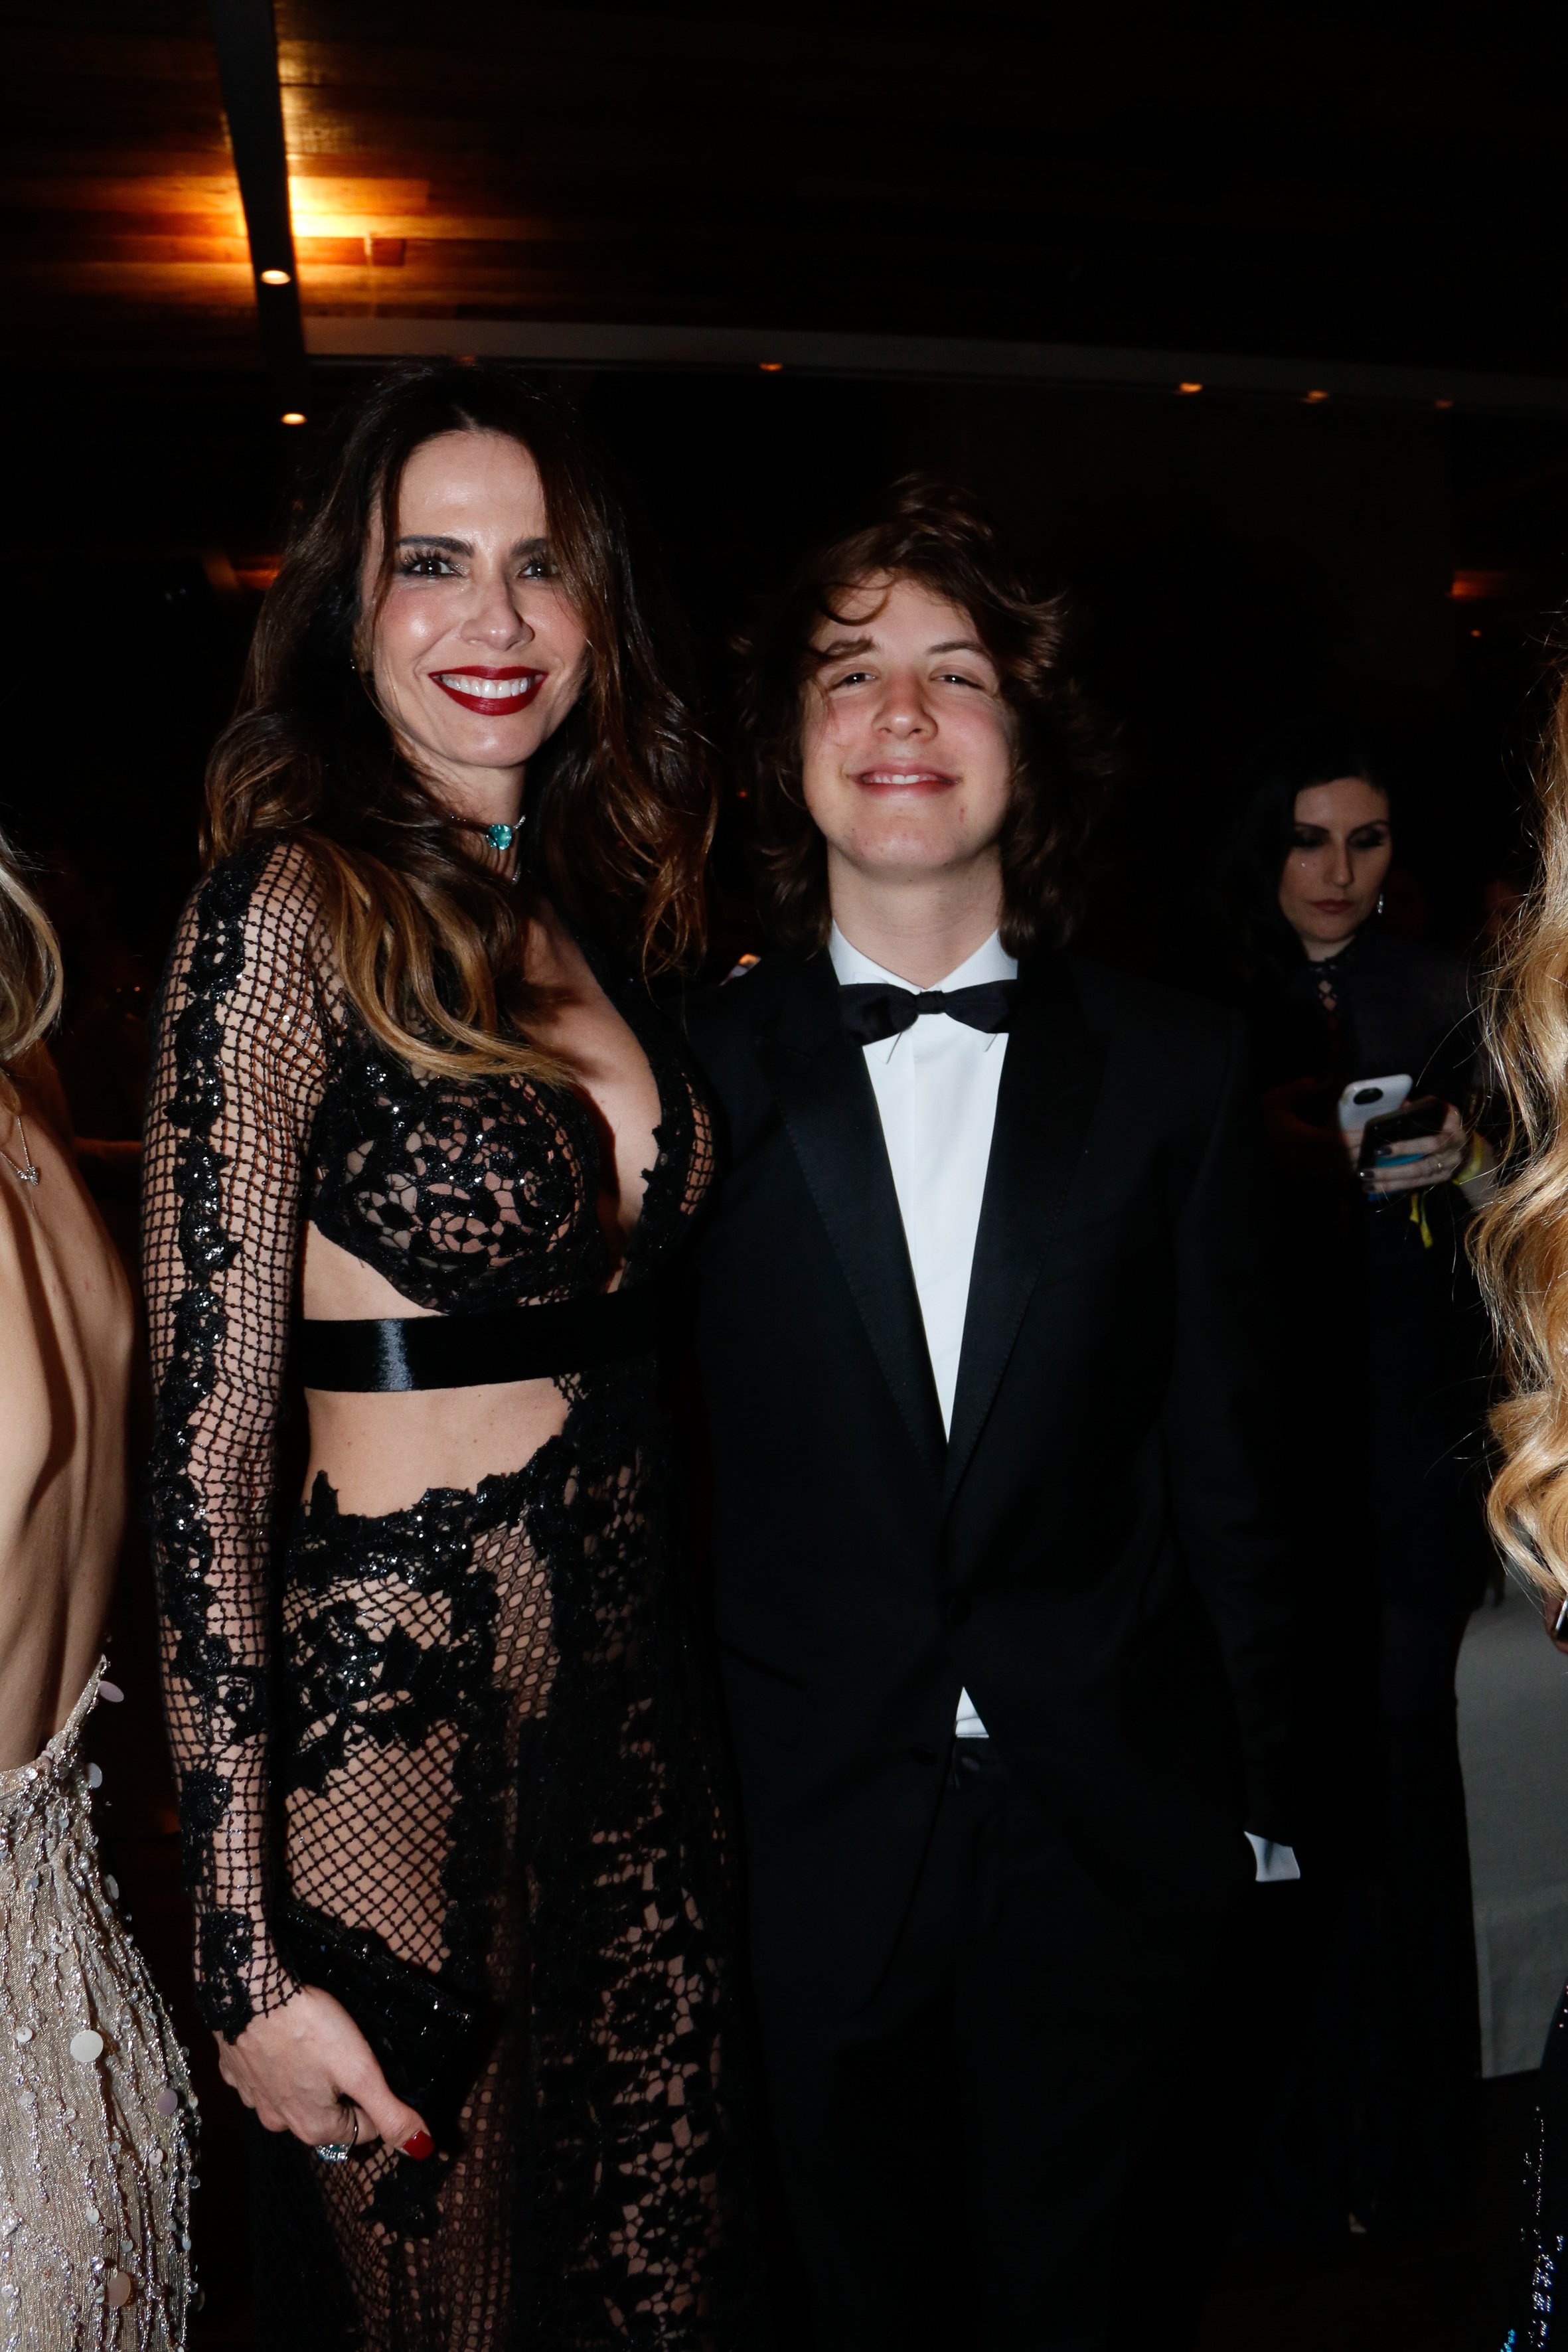 Former model Luciana Gimenez and her son Lucas Jagger attend the 7th Annual amfAR Inspiration Gala on April 27, 2017 in Sao Paulo, Brazil ┃ Source: Getty Images